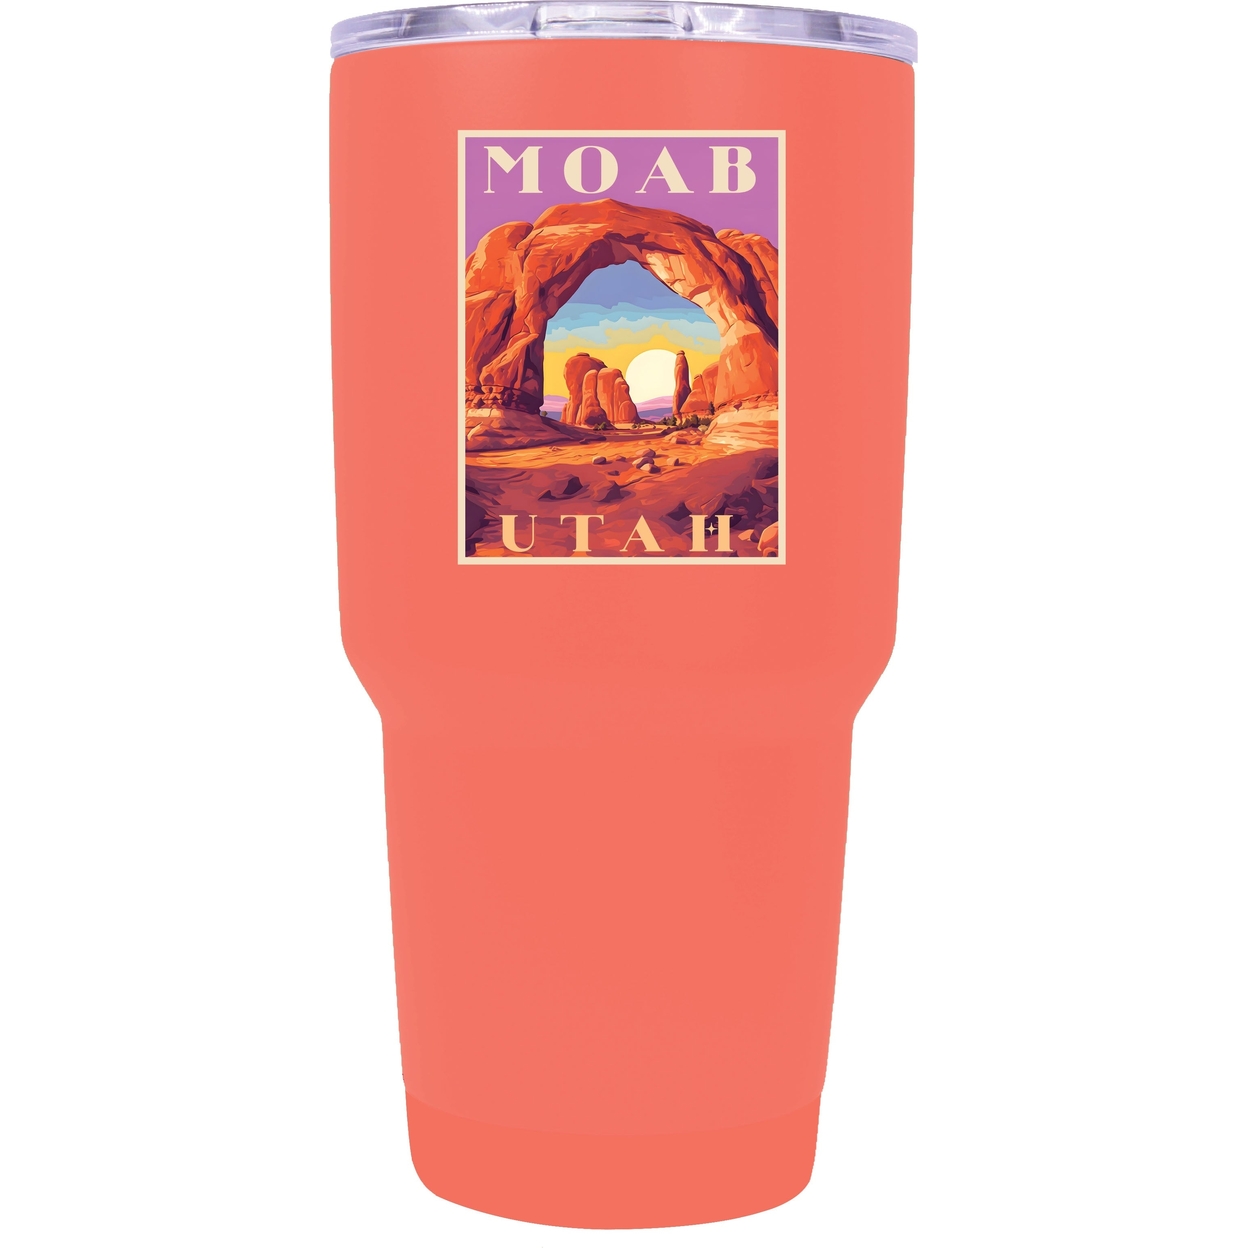 Moab Utah Souvenir 24 Oz Insulated Stainless Steel Tumbler - Coral,,2-Pack